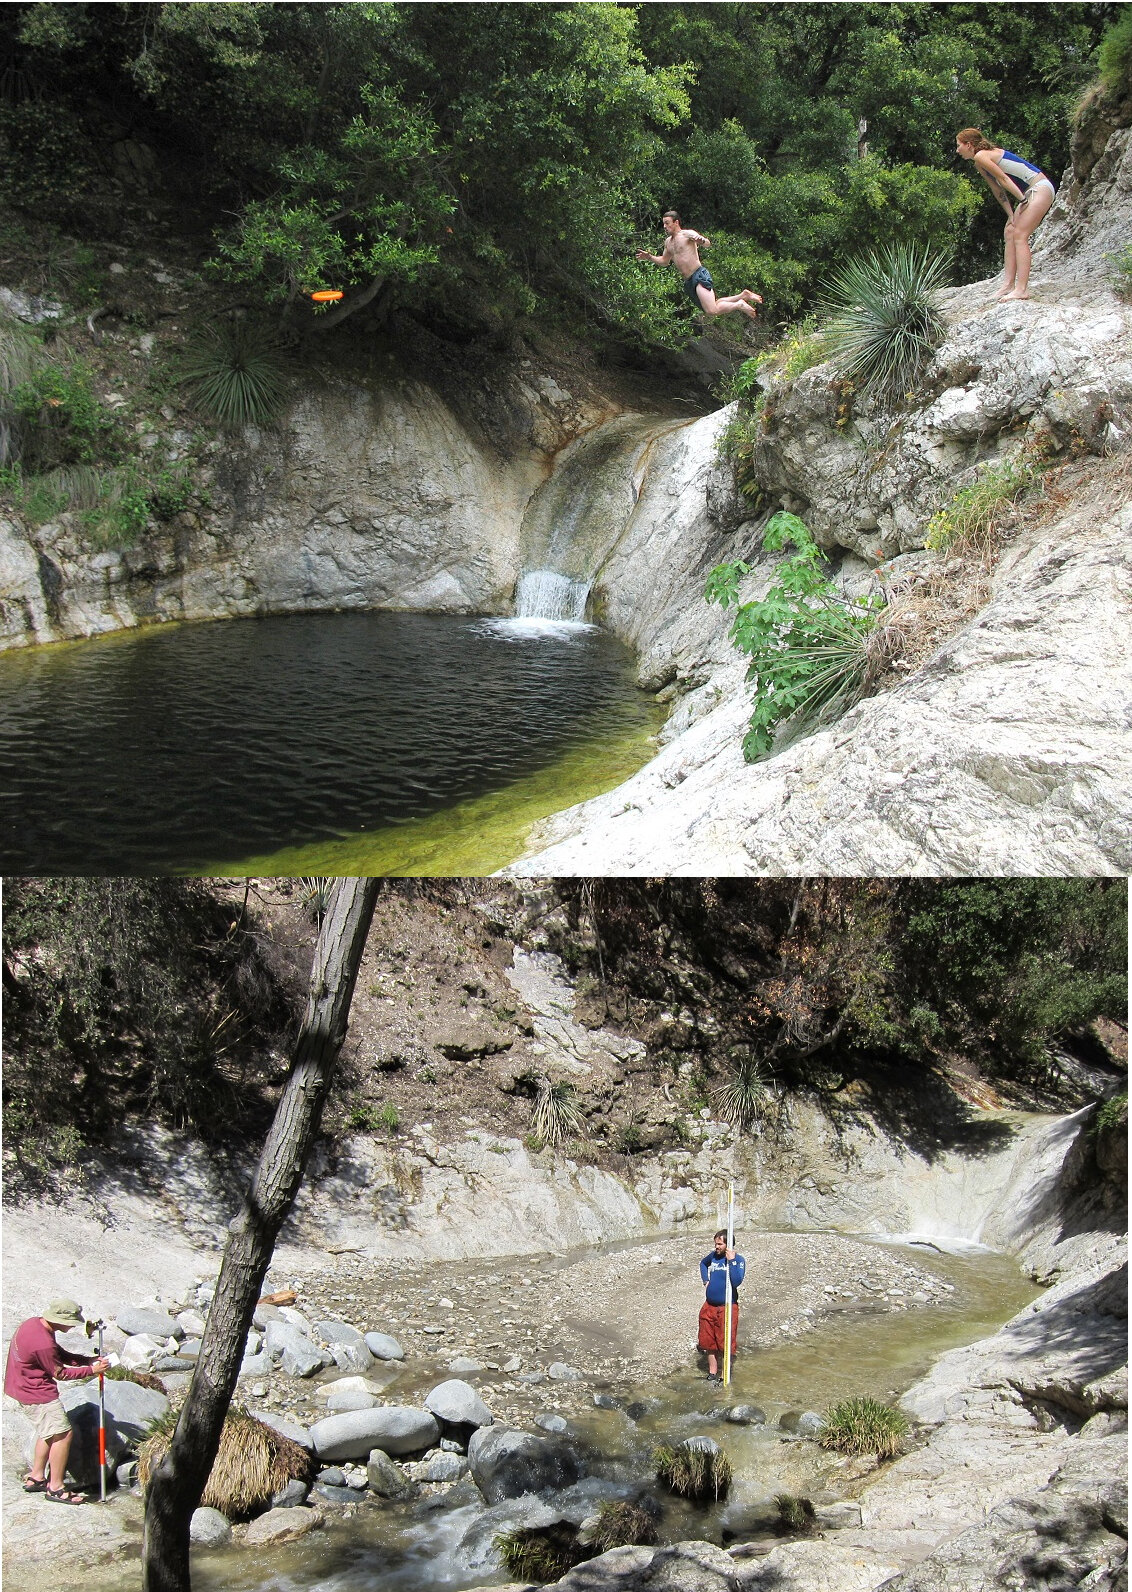 What causes pools below waterfalls to periodically fill with sediment?